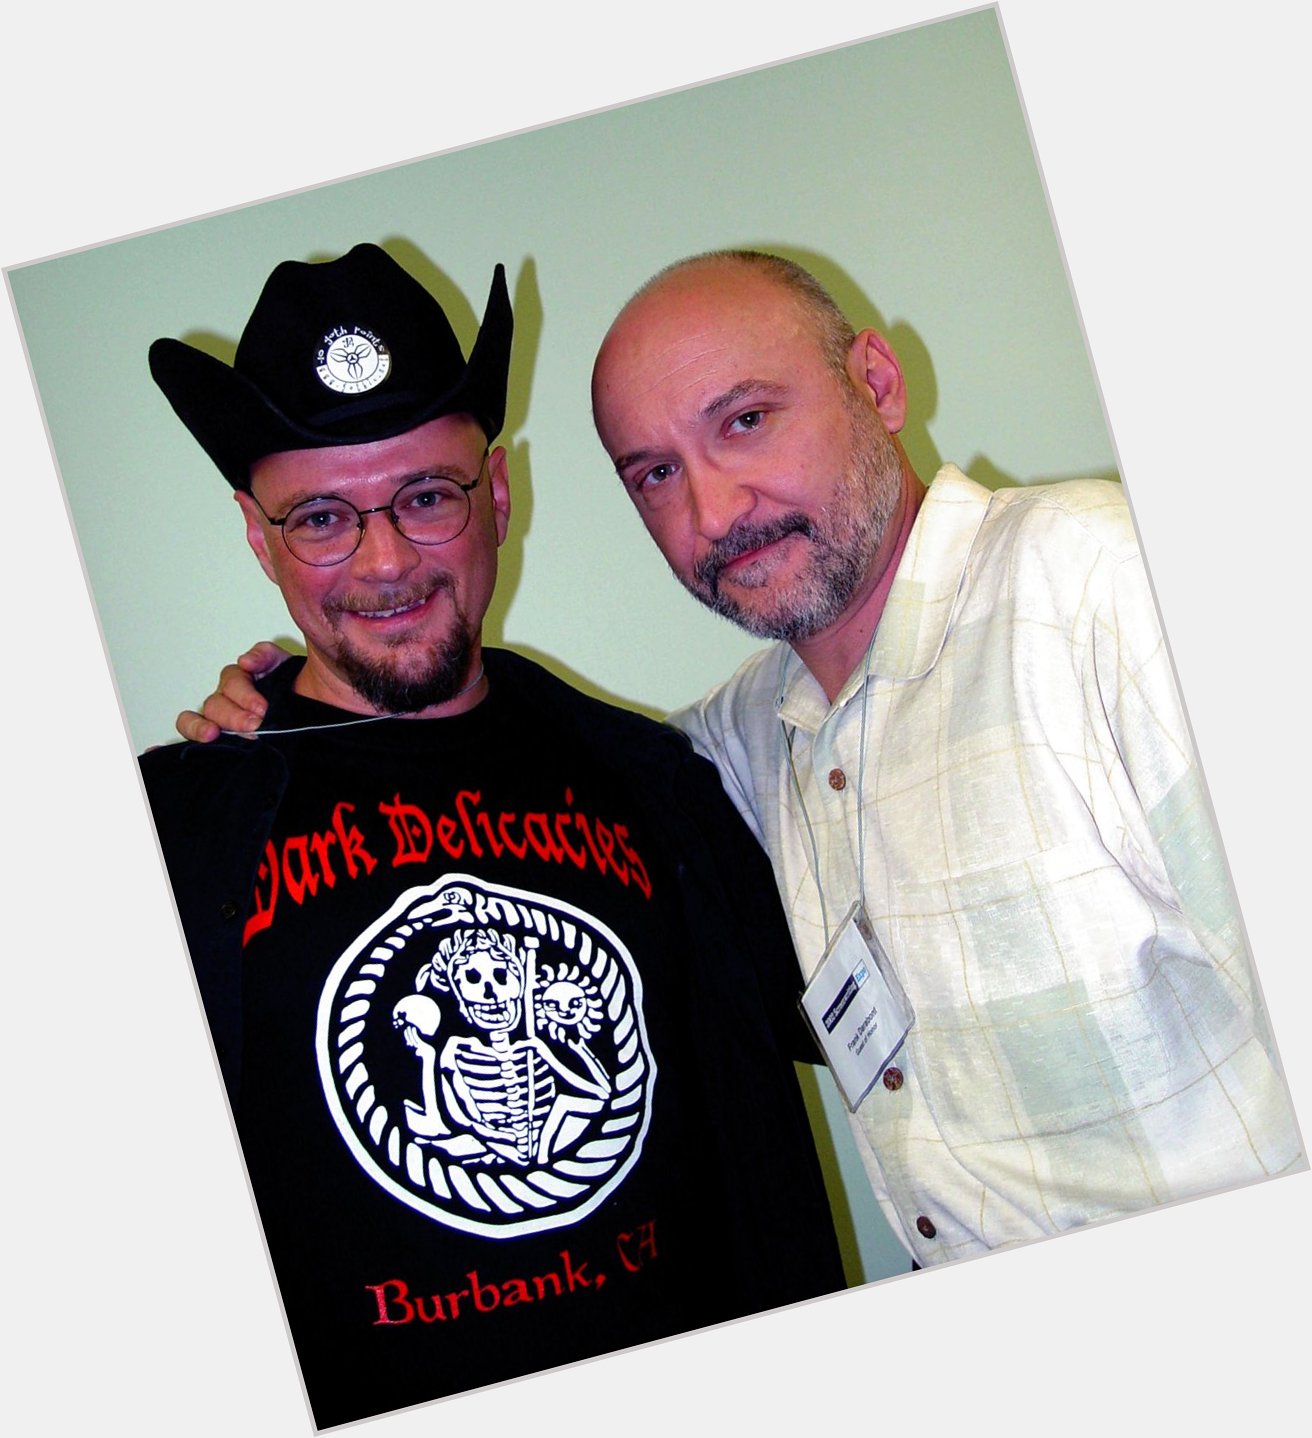 HAPPY BIRTHDAY Frank Darabont!
I learned today that you are only 3 years older than me! 